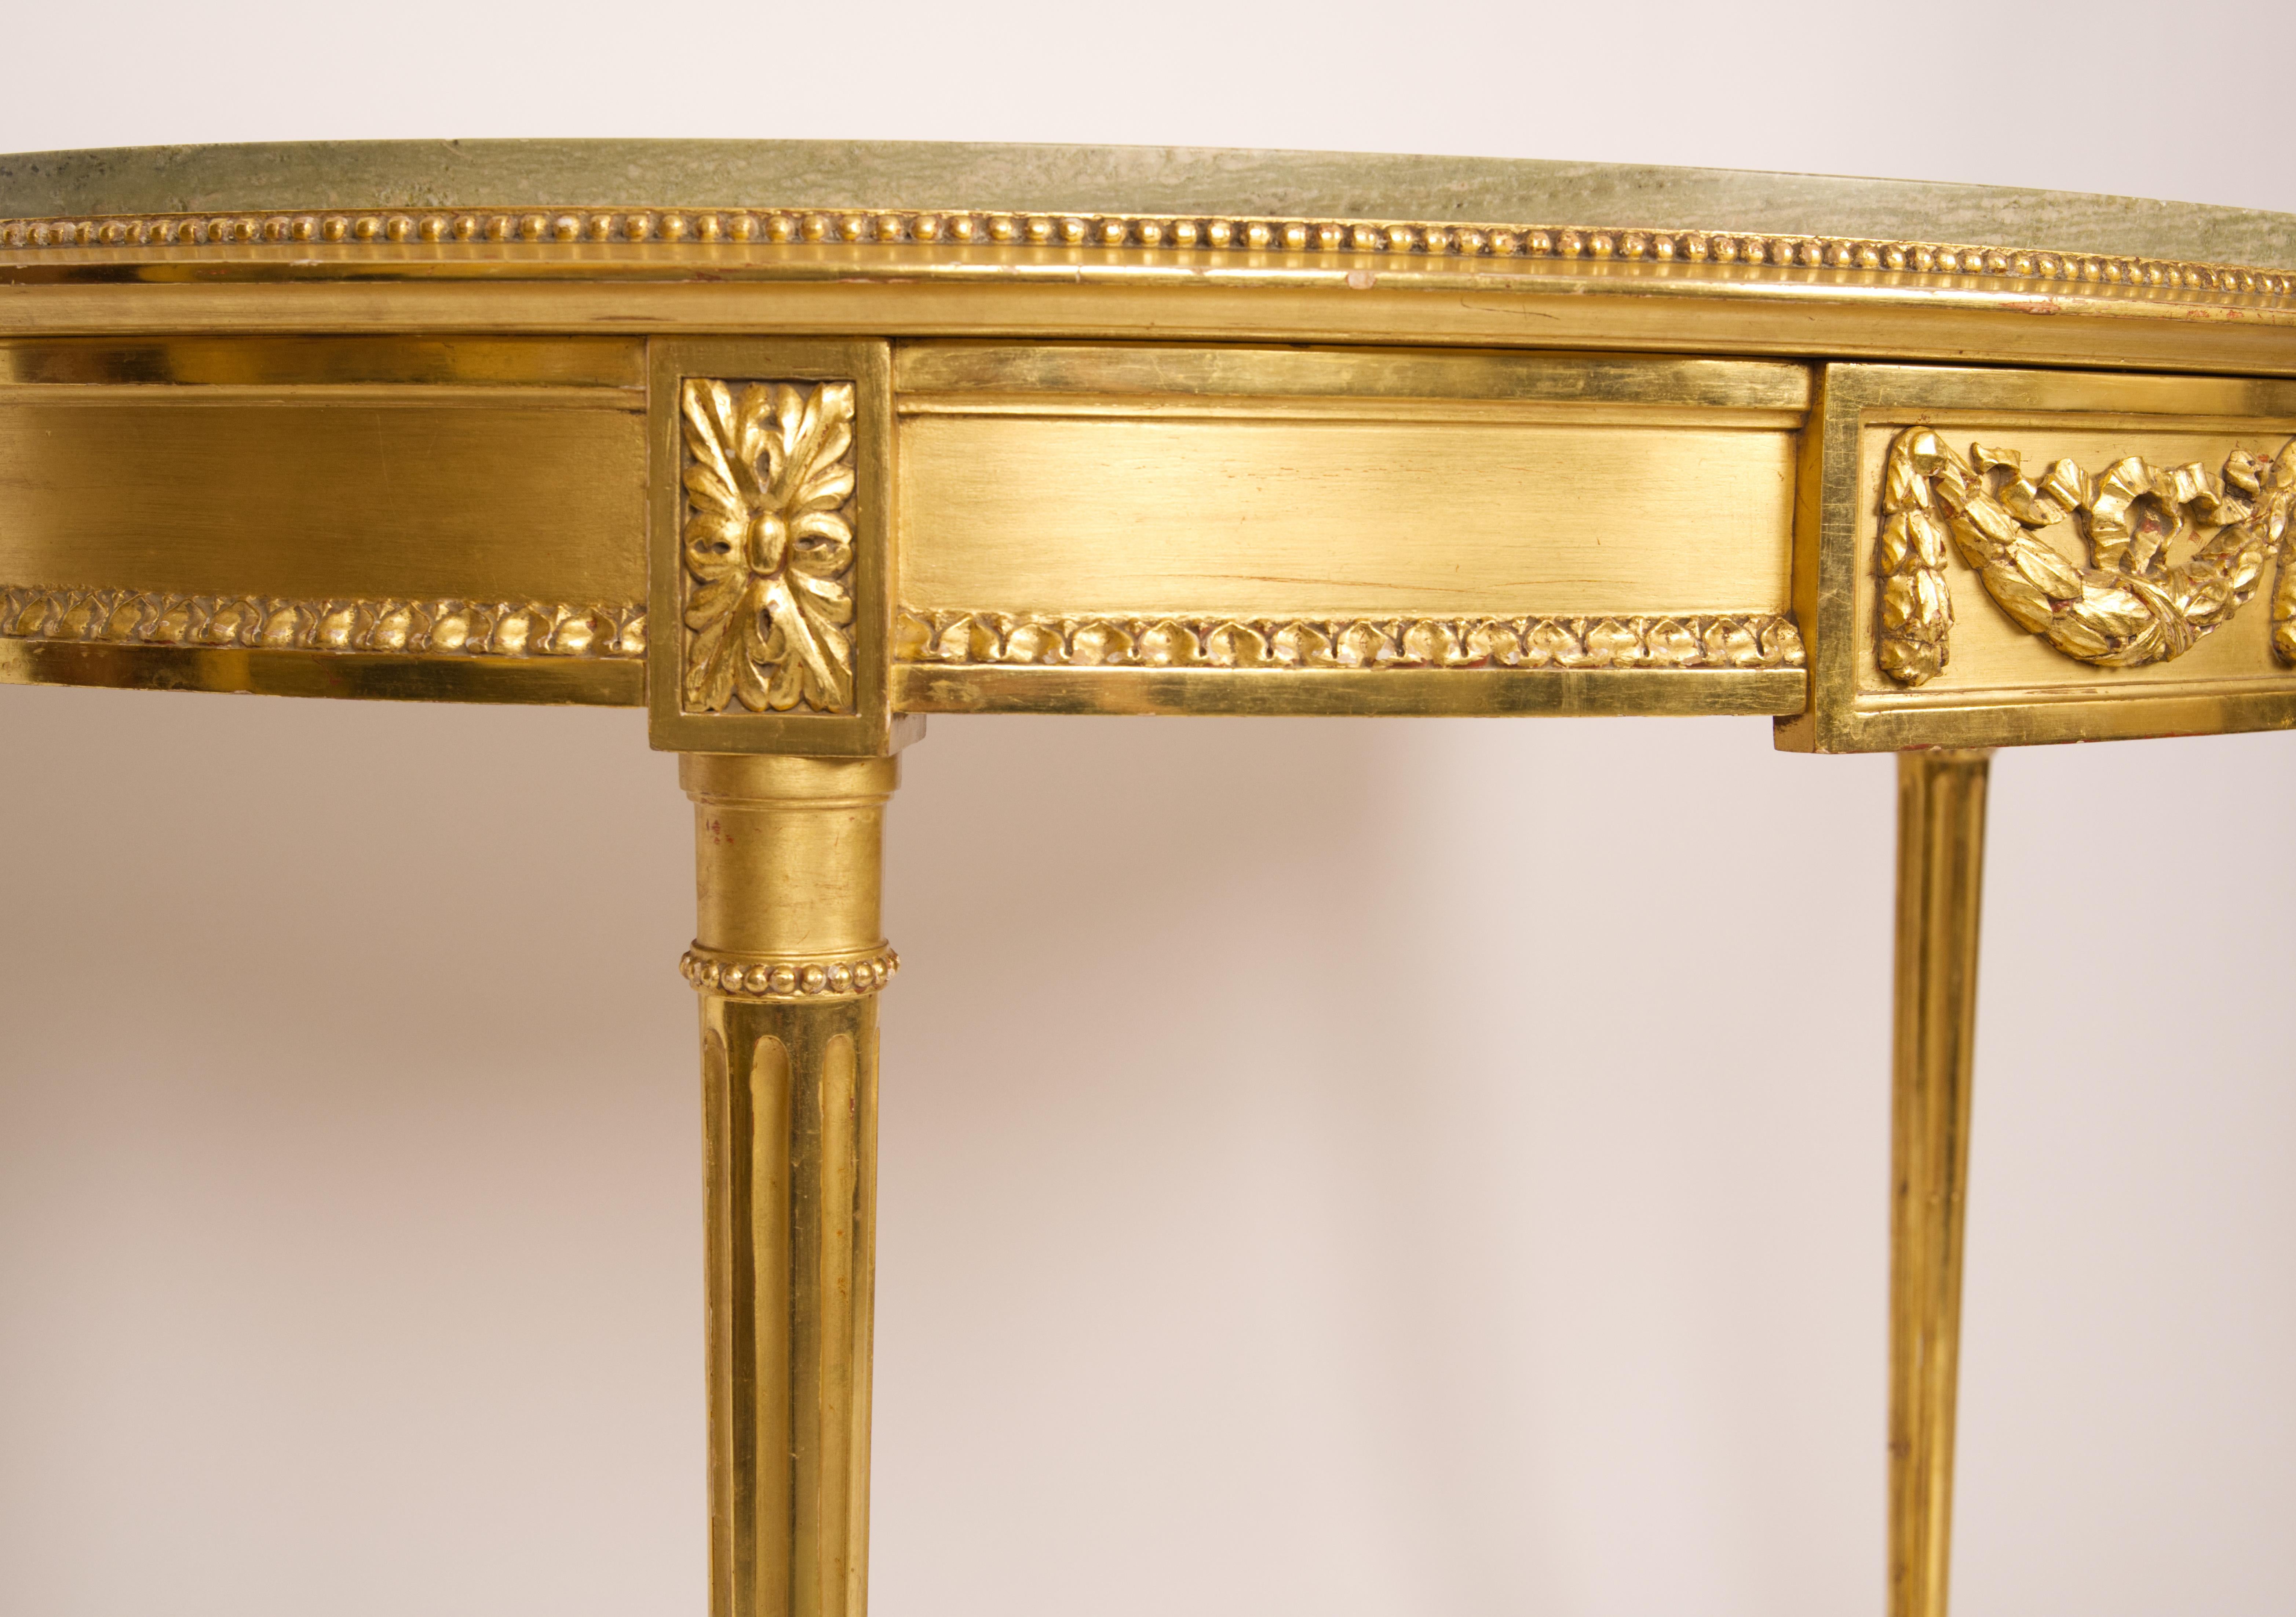 Gold gilded Gustavian styled table with intricate carvings around the frame and legs with a green marble top resting upon the frame. Marked by a NK Nordic company seal.